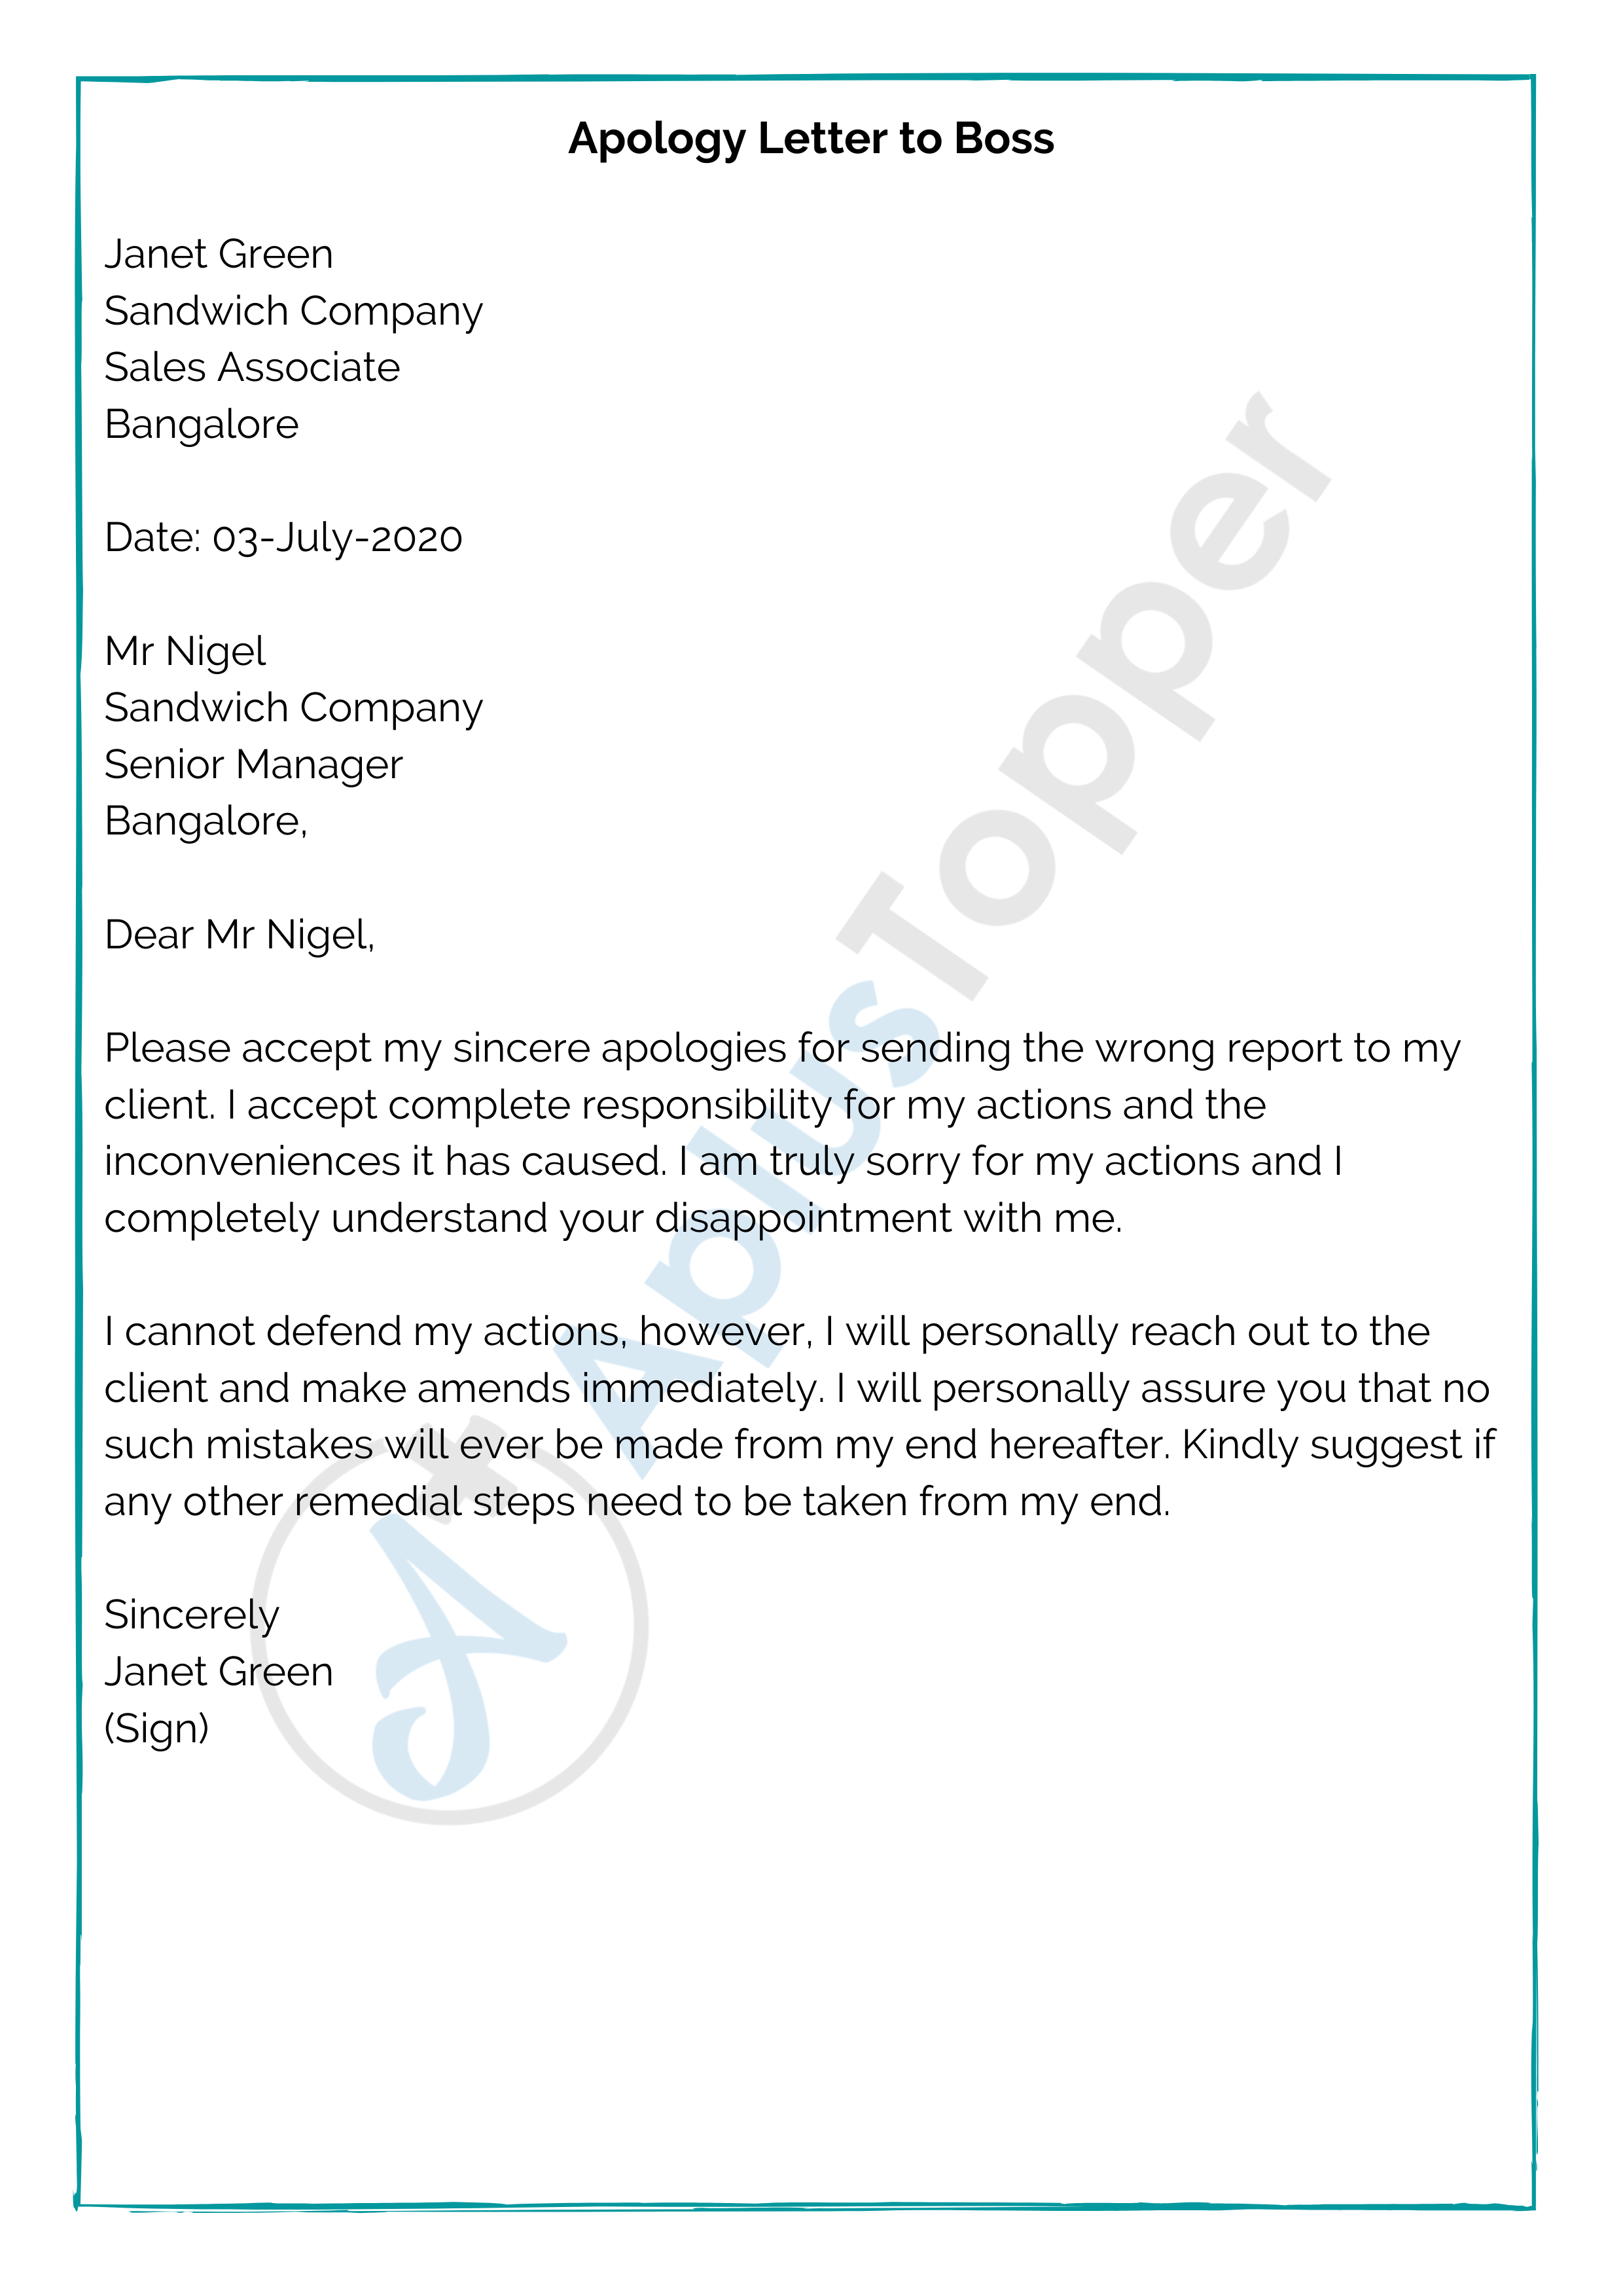 Sample Of Apology Letter To Boss